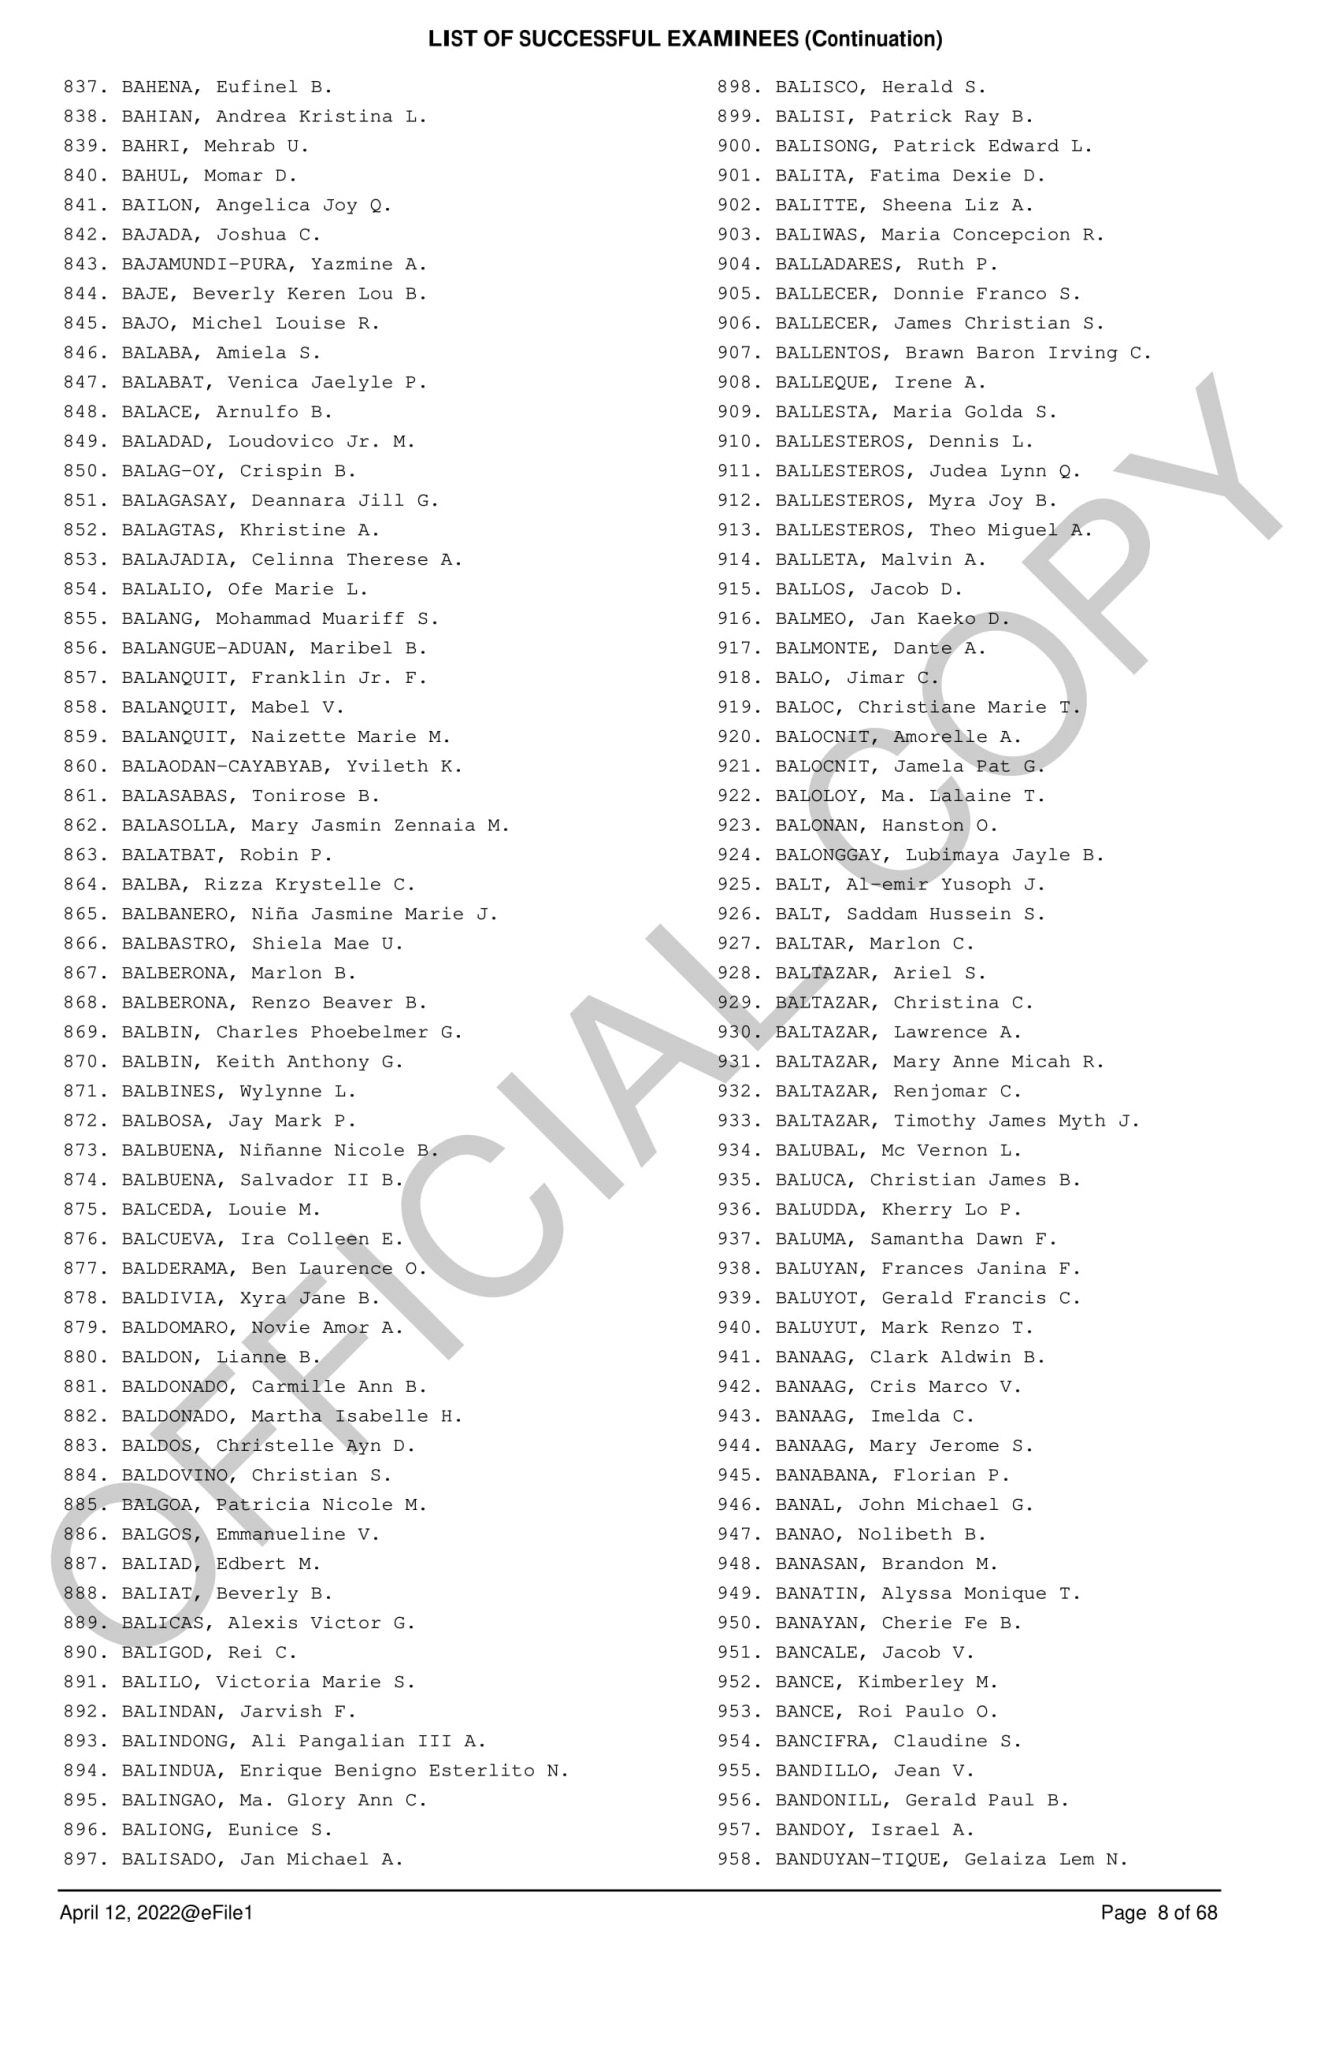 2022 BAR Exam Results Complete List of Passers WhatALife!